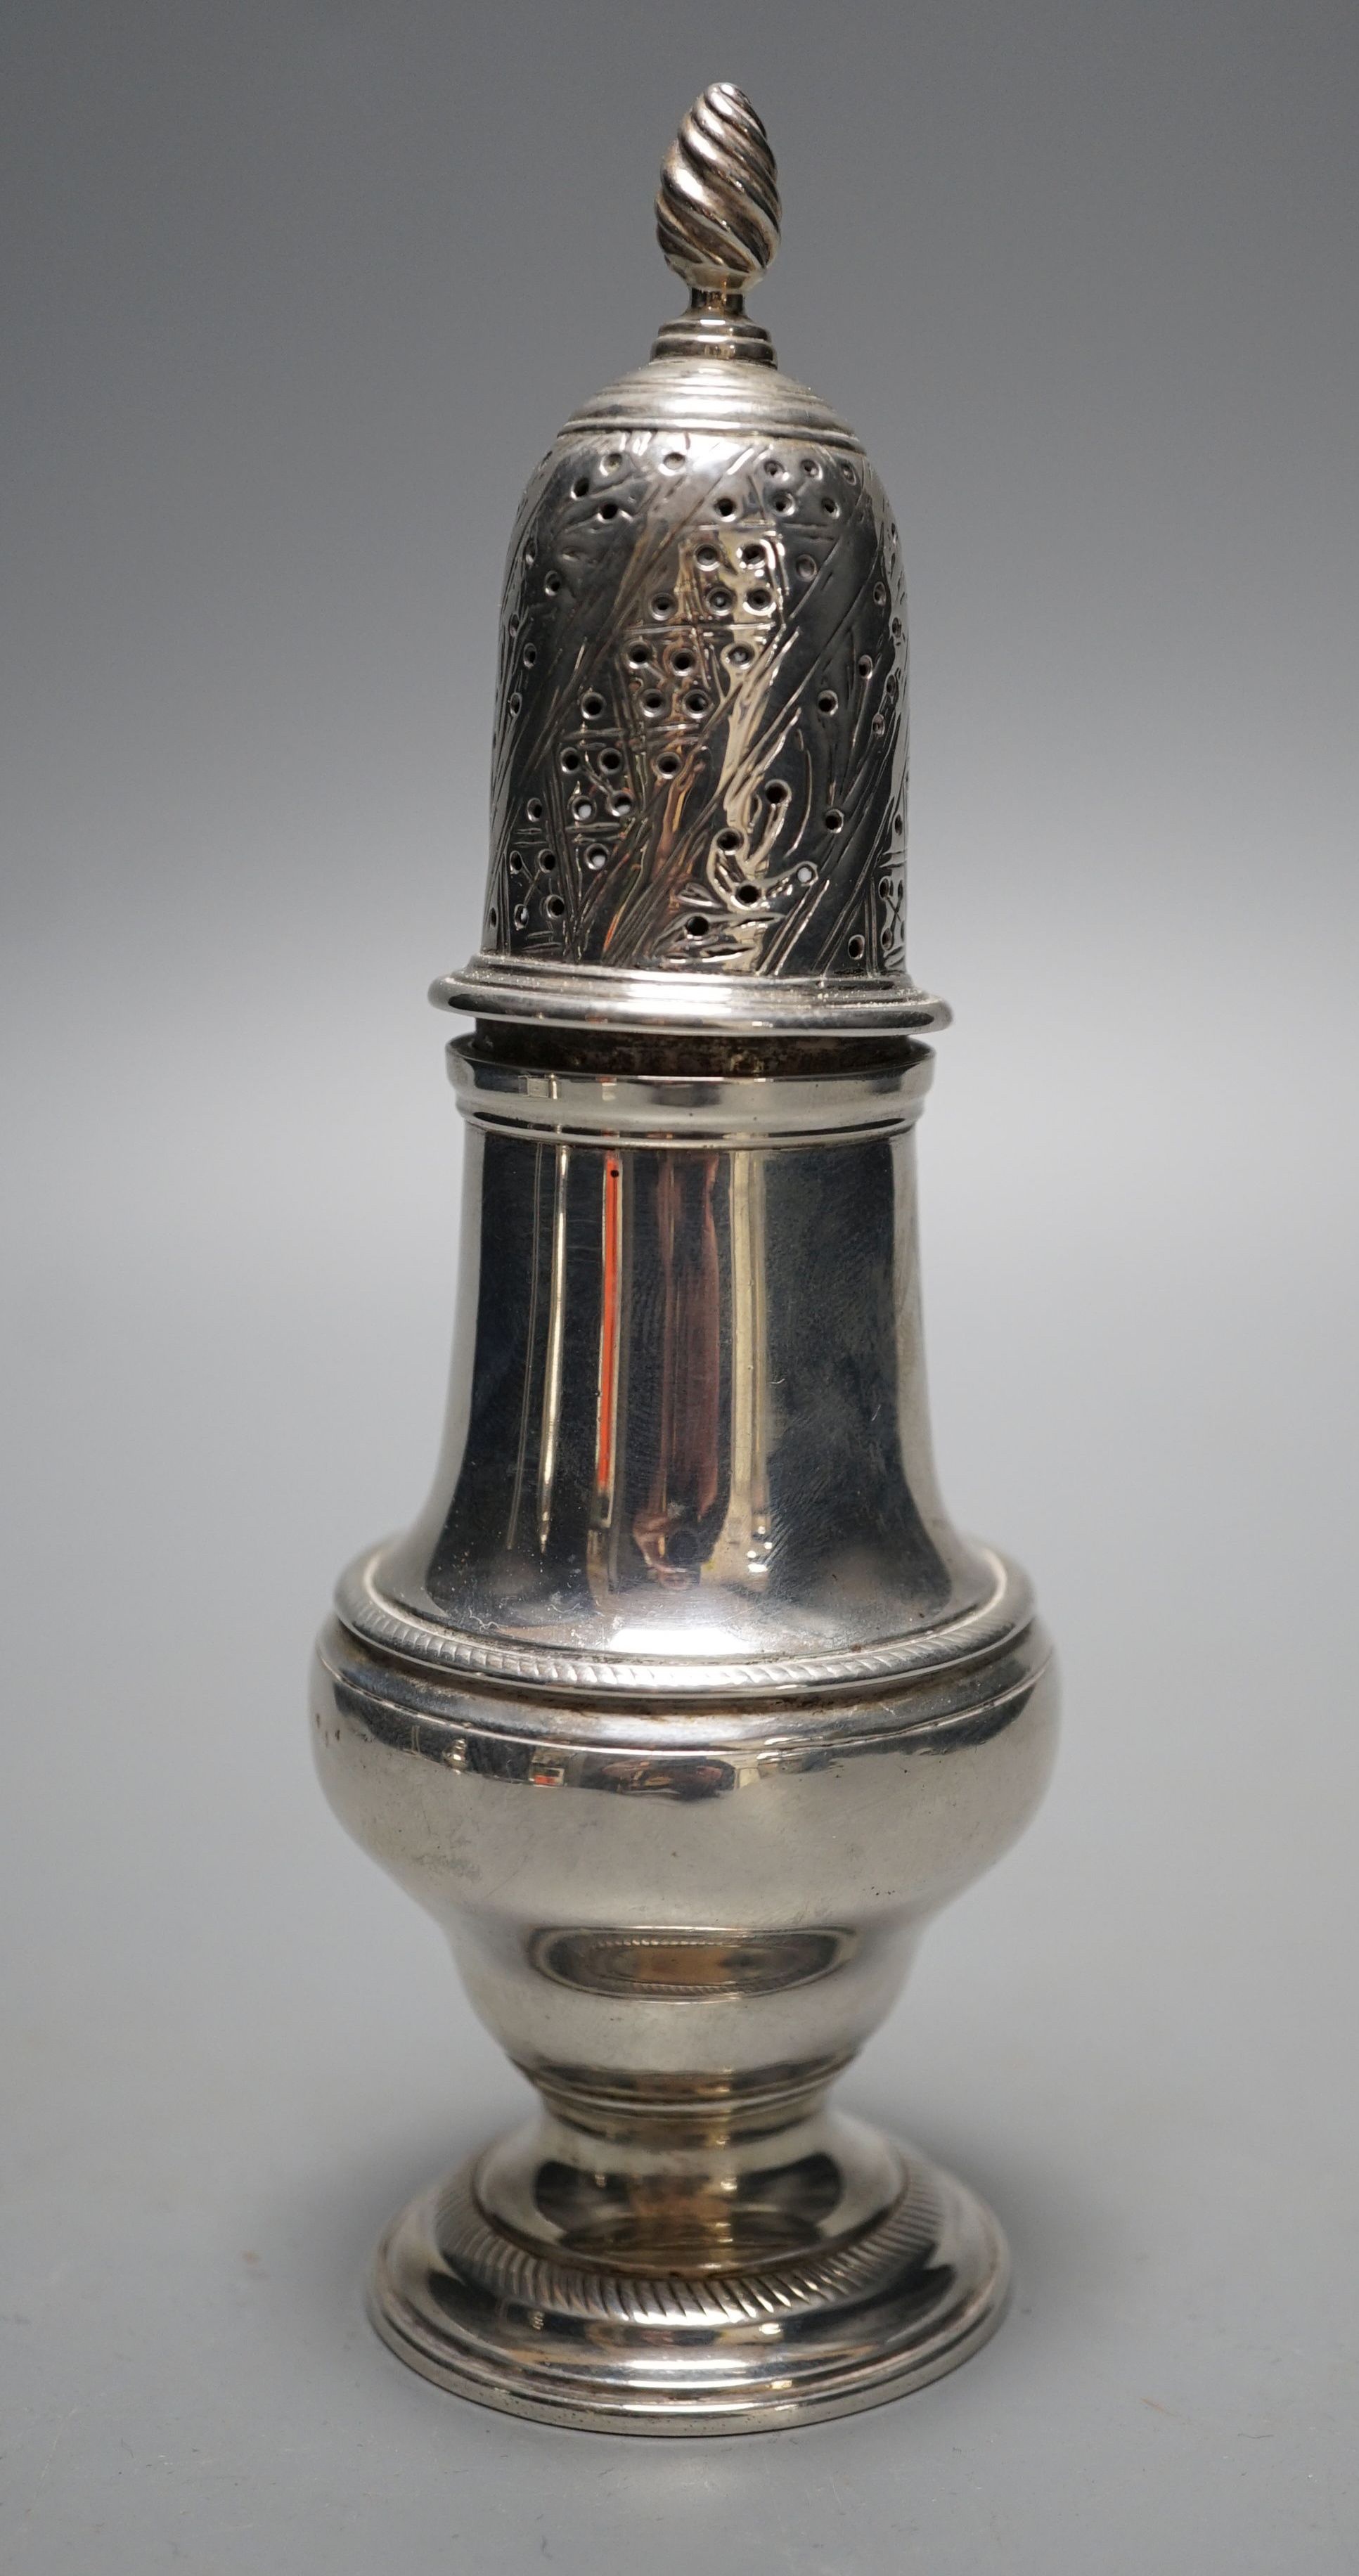 An early George III silver pepper, with interior cap with finial, by John Delmester, London, 1760, 15.5cm, 4.5oz.